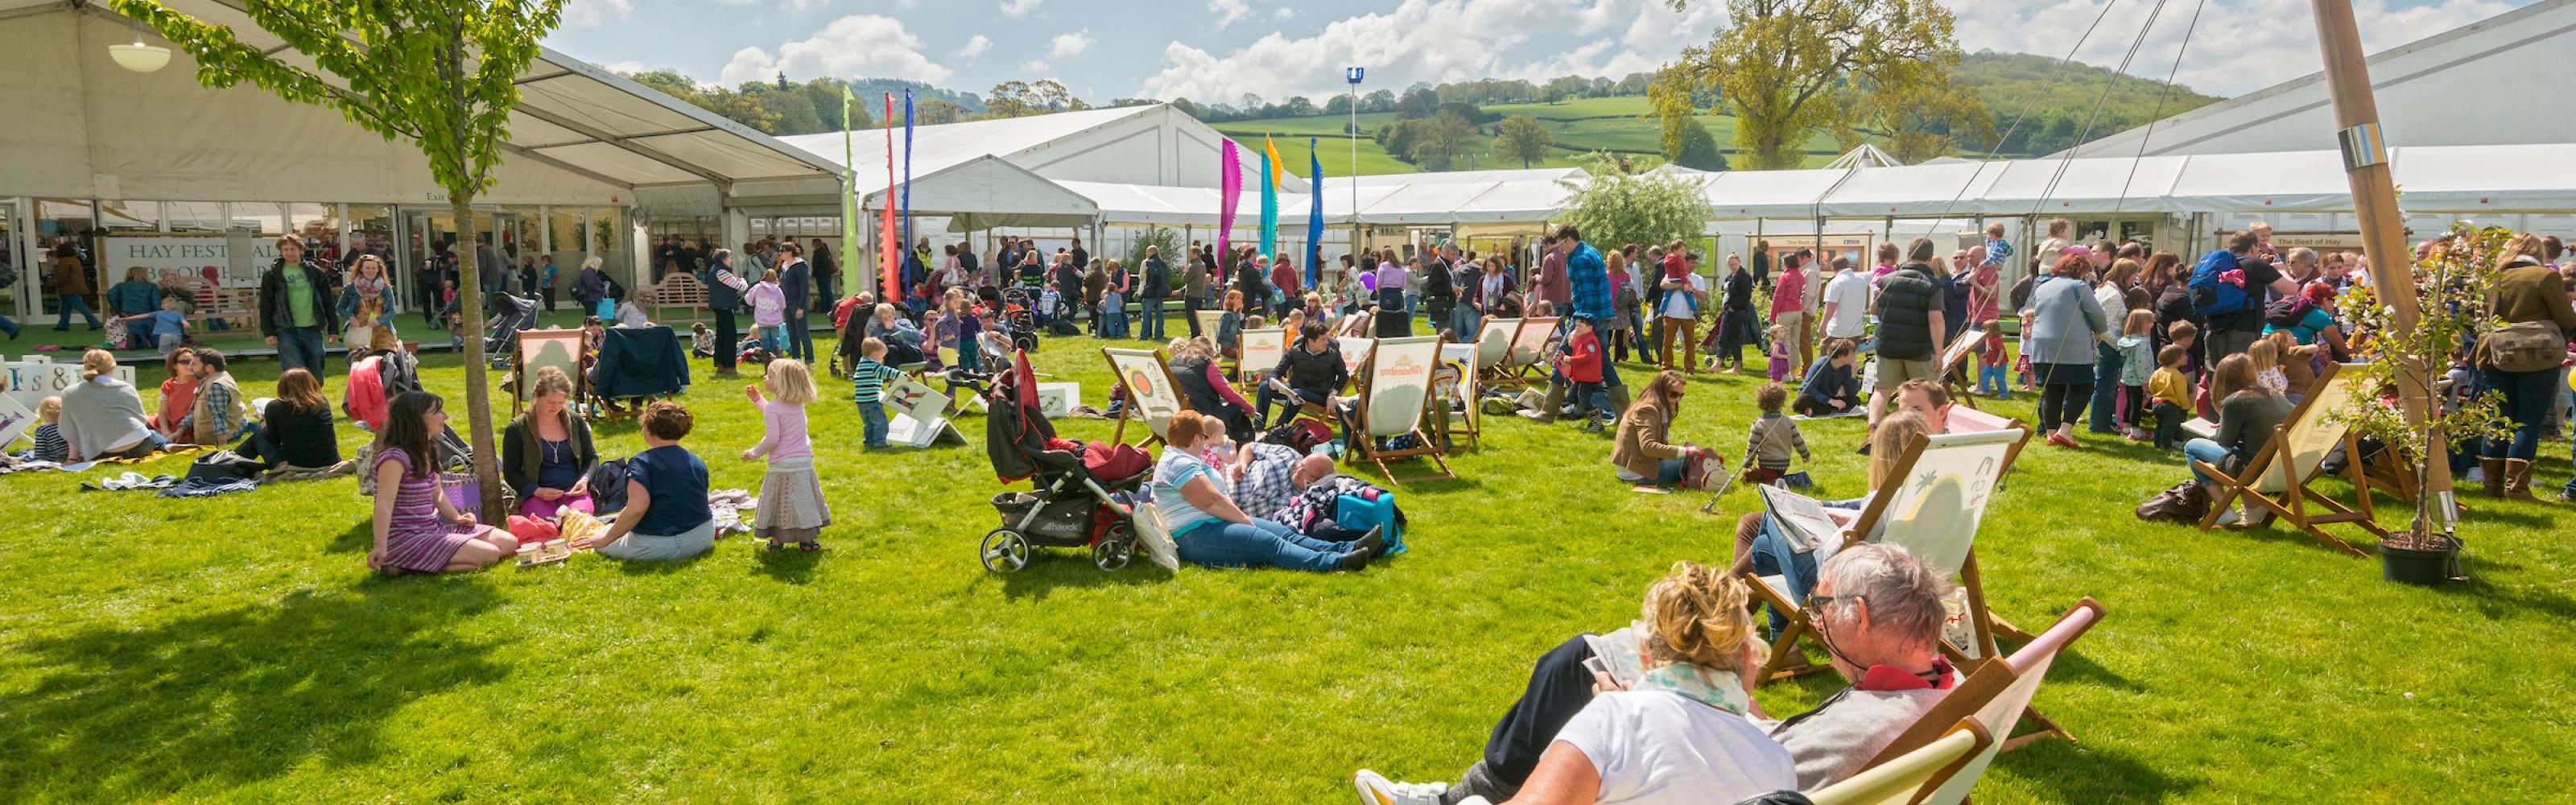 Hay Festival Literature Events South Wales Visit Wales